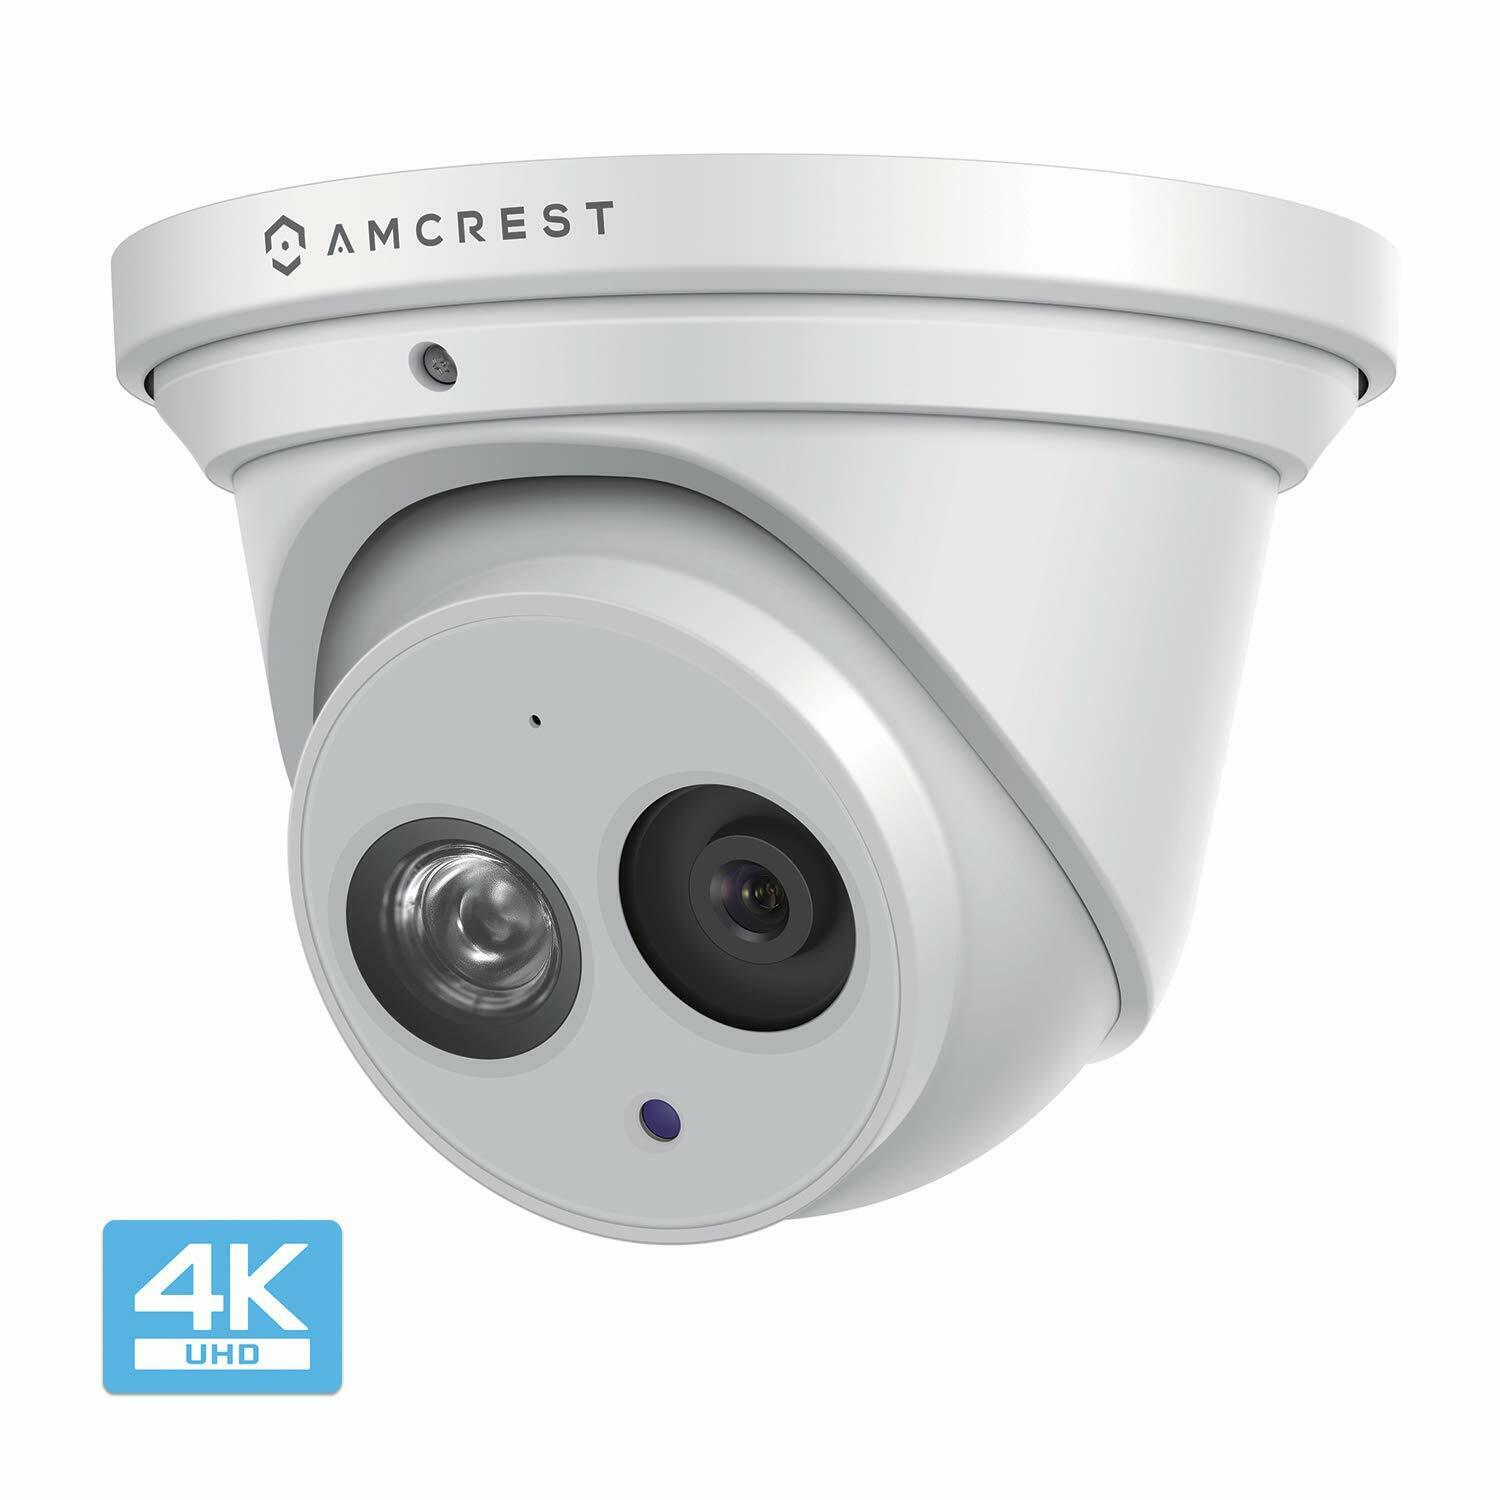 Amcrest UltraHD 8M 4K Turret PoE Dome Outdoor Security IP Camera Renewed